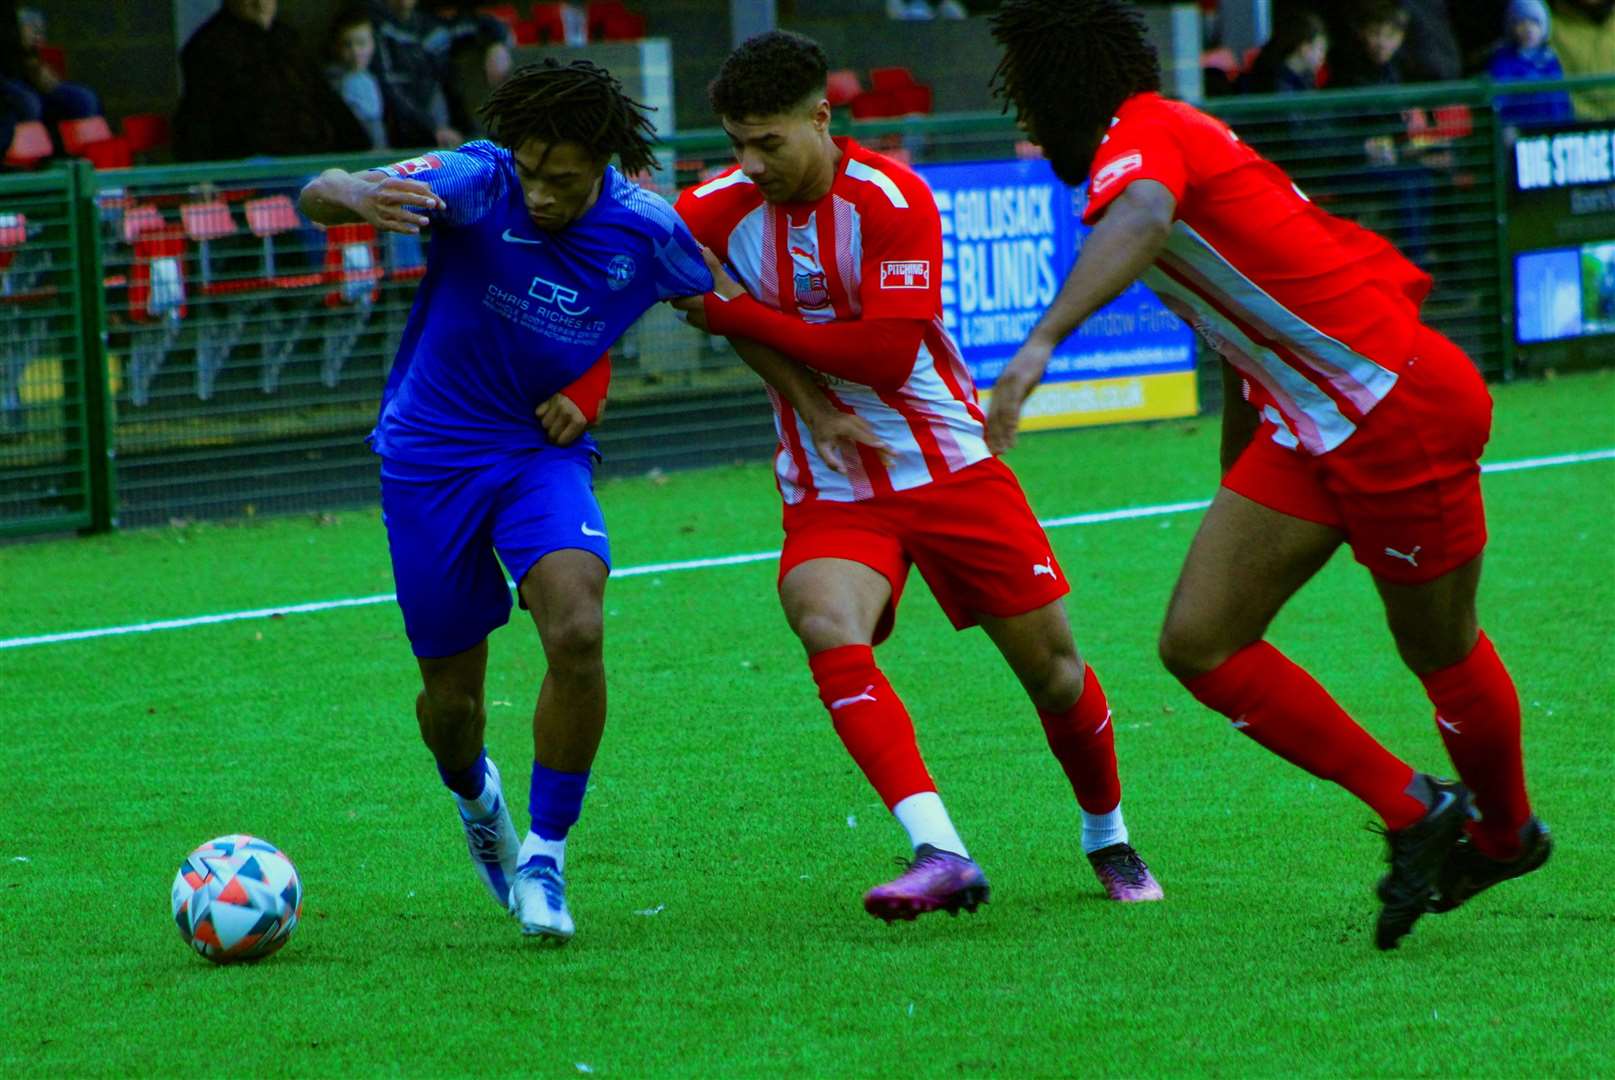 Herne Bay's Kymani Thomas being held by the away defence in the home team's 3-1 win against Bowers & Pitsea. Picture: Keith Davy